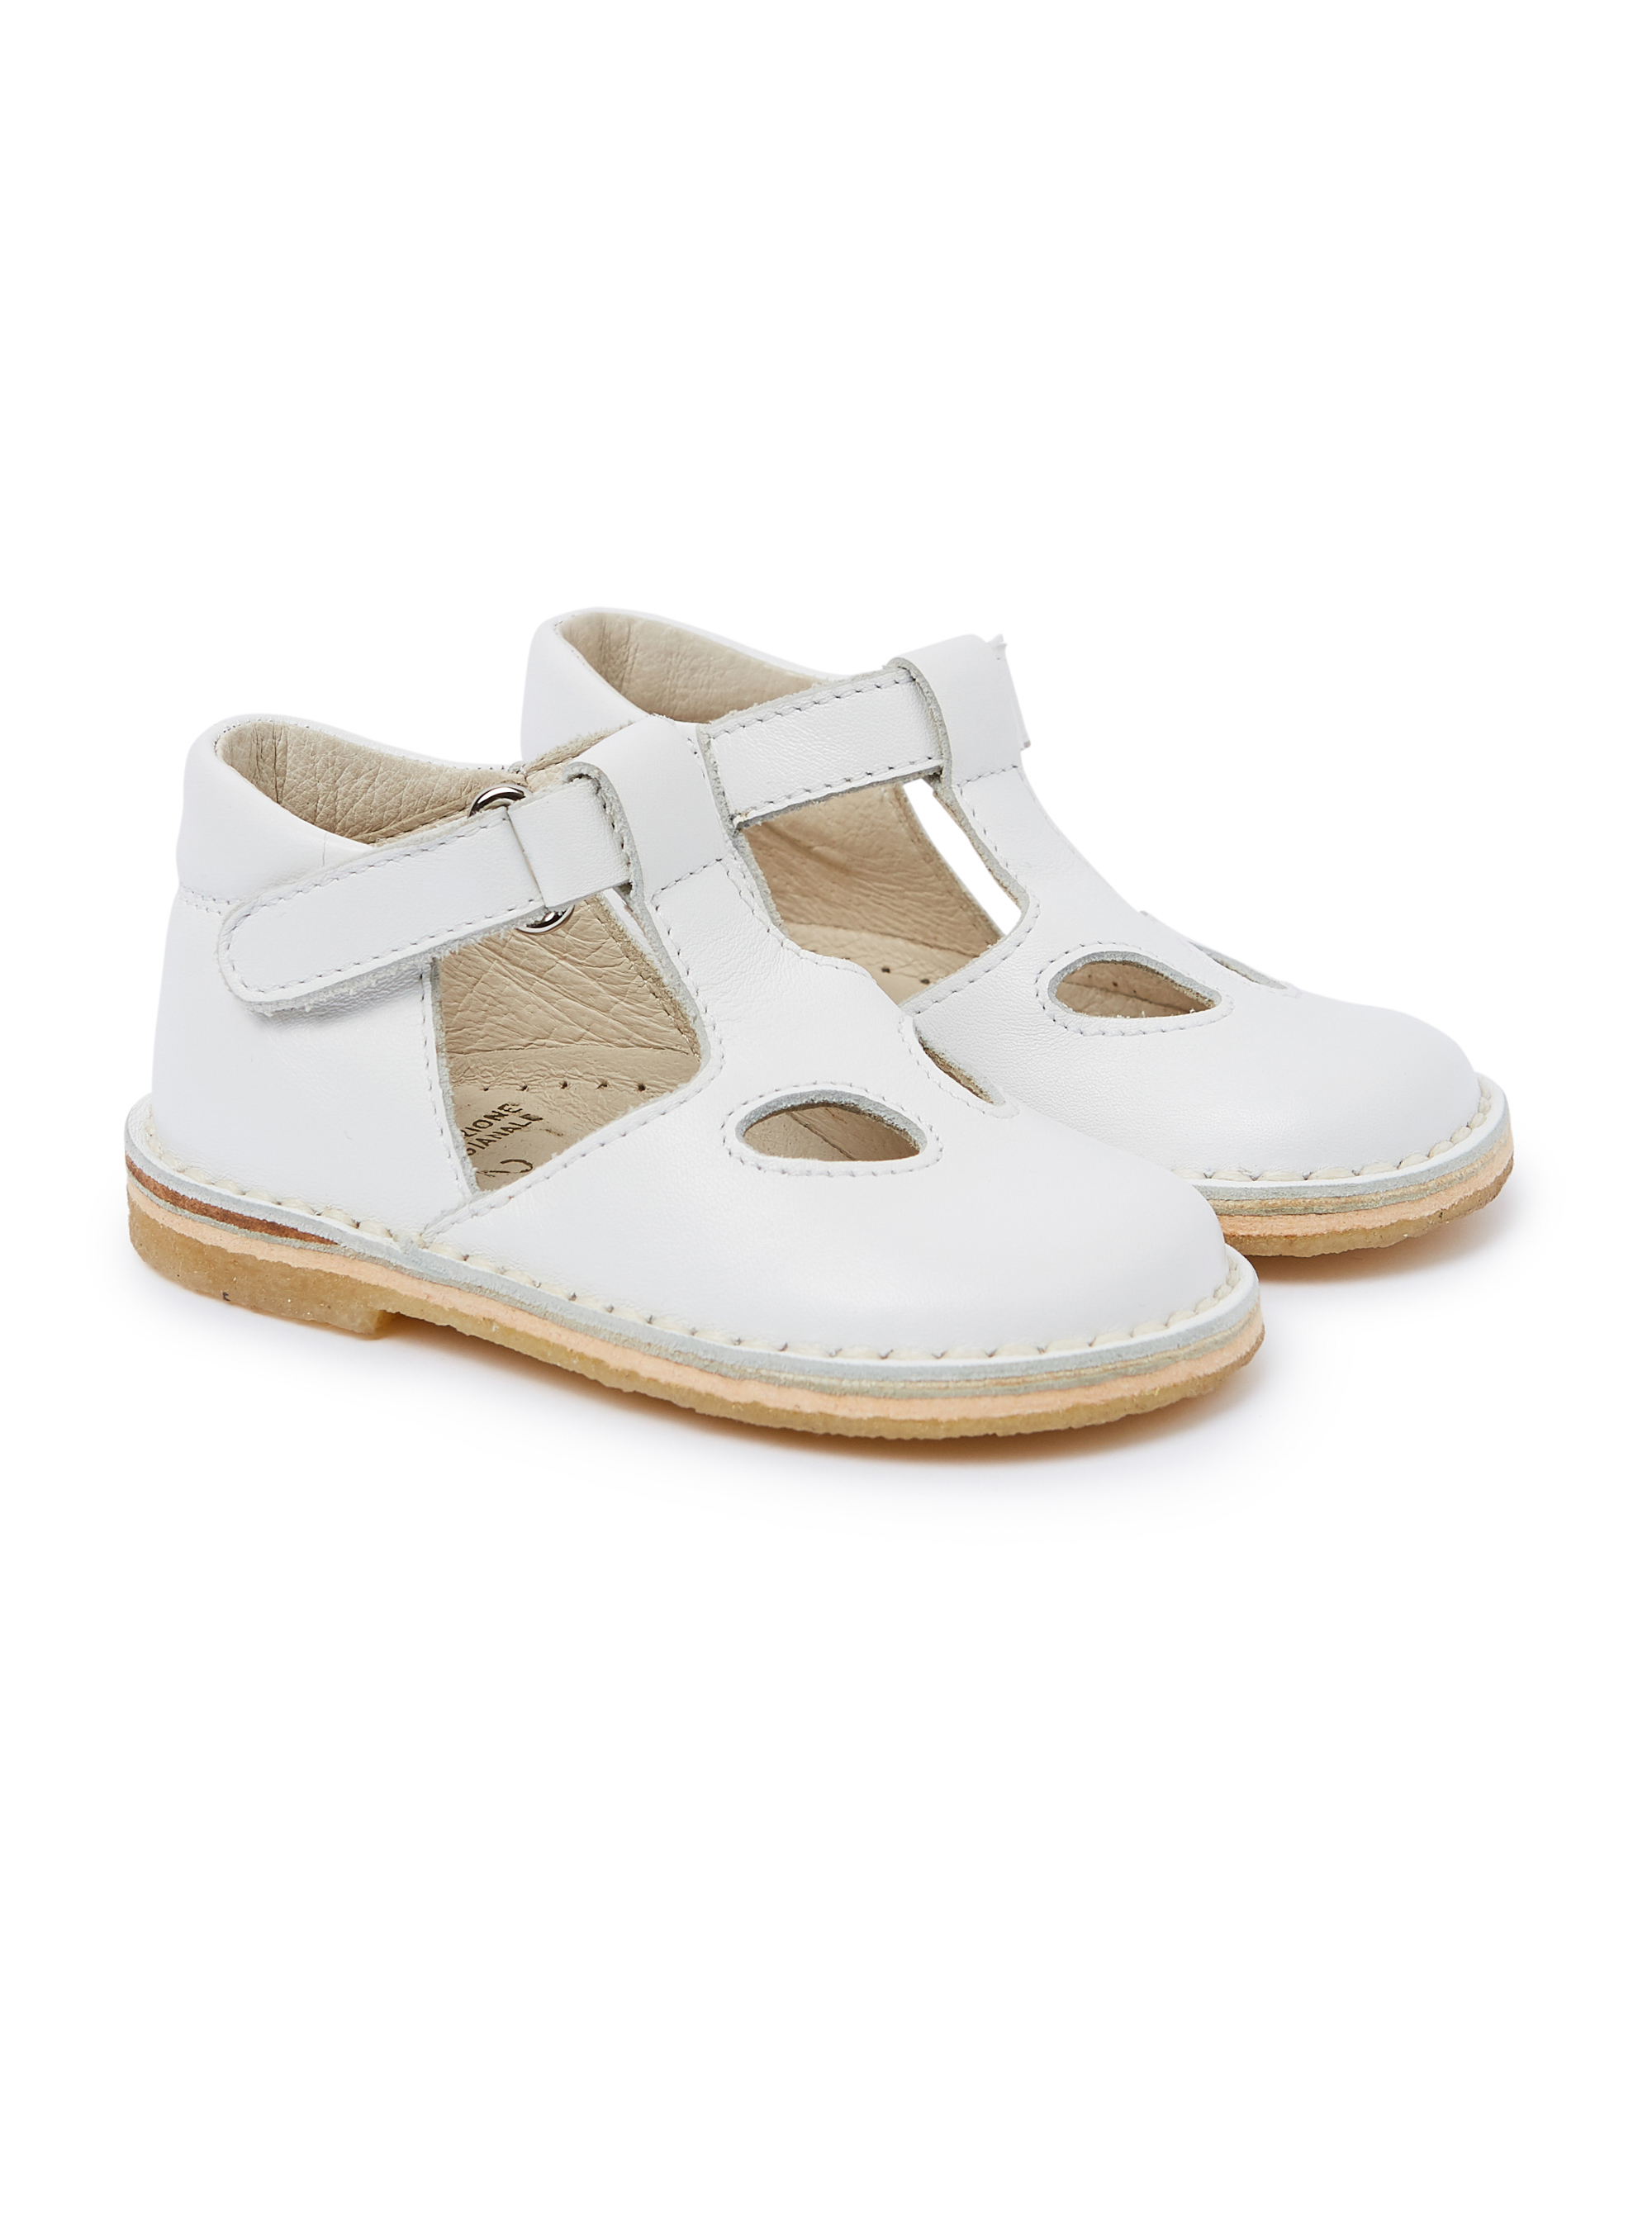 White leather sandals with 2 holes - Shoes - Il Gufo